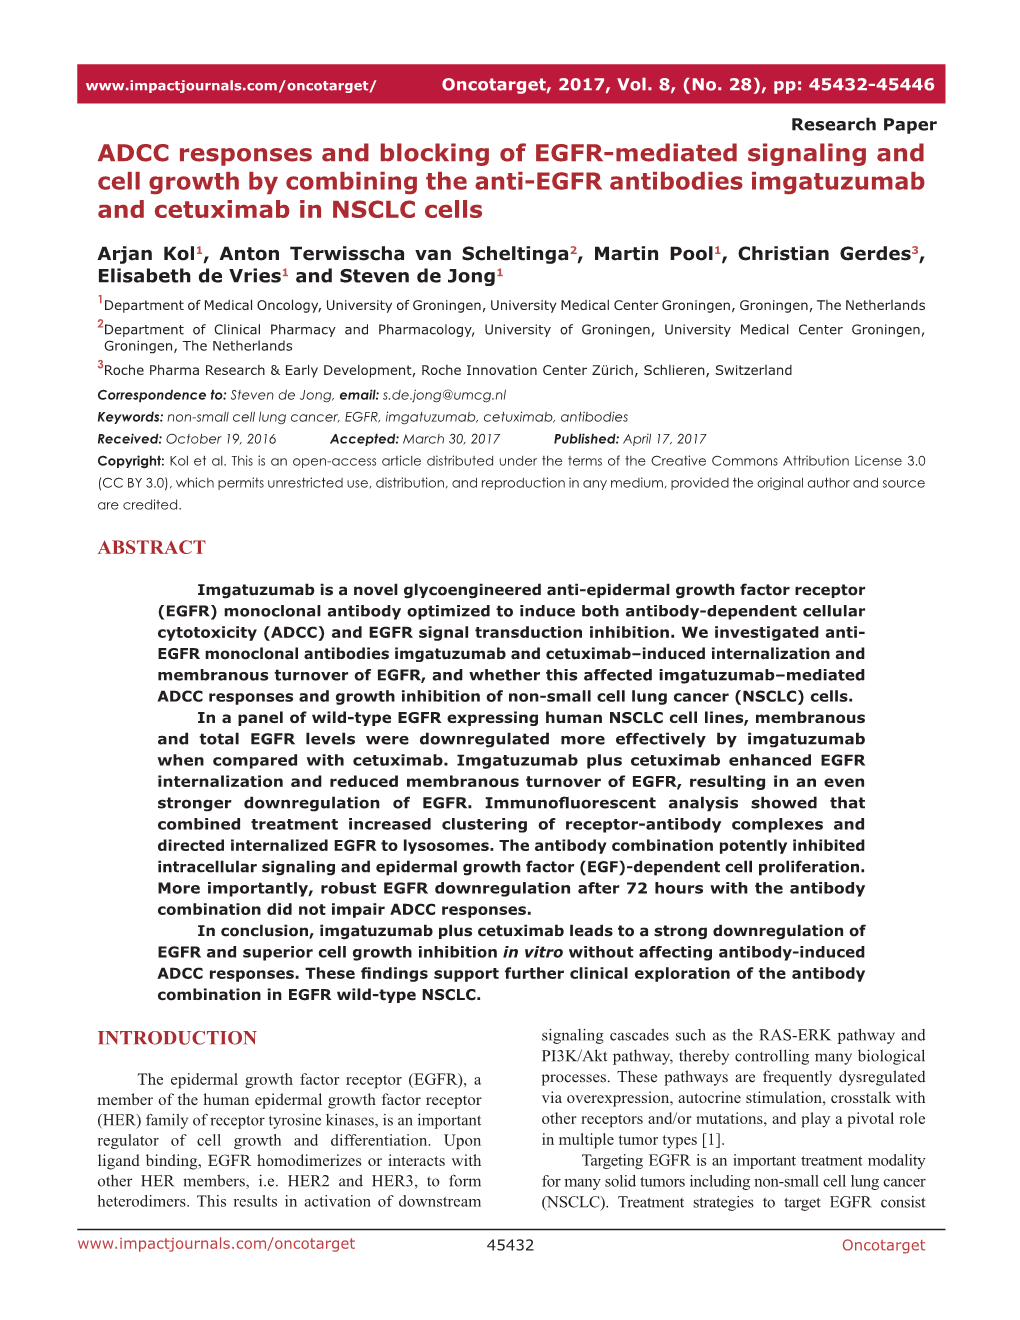 ADCC Responses and Blocking of EGFR-Mediated Signaling and Cell Growth by Combining the Anti-EGFR Antibodies Imgatuzumab and Cetuximab in NSCLC Cells